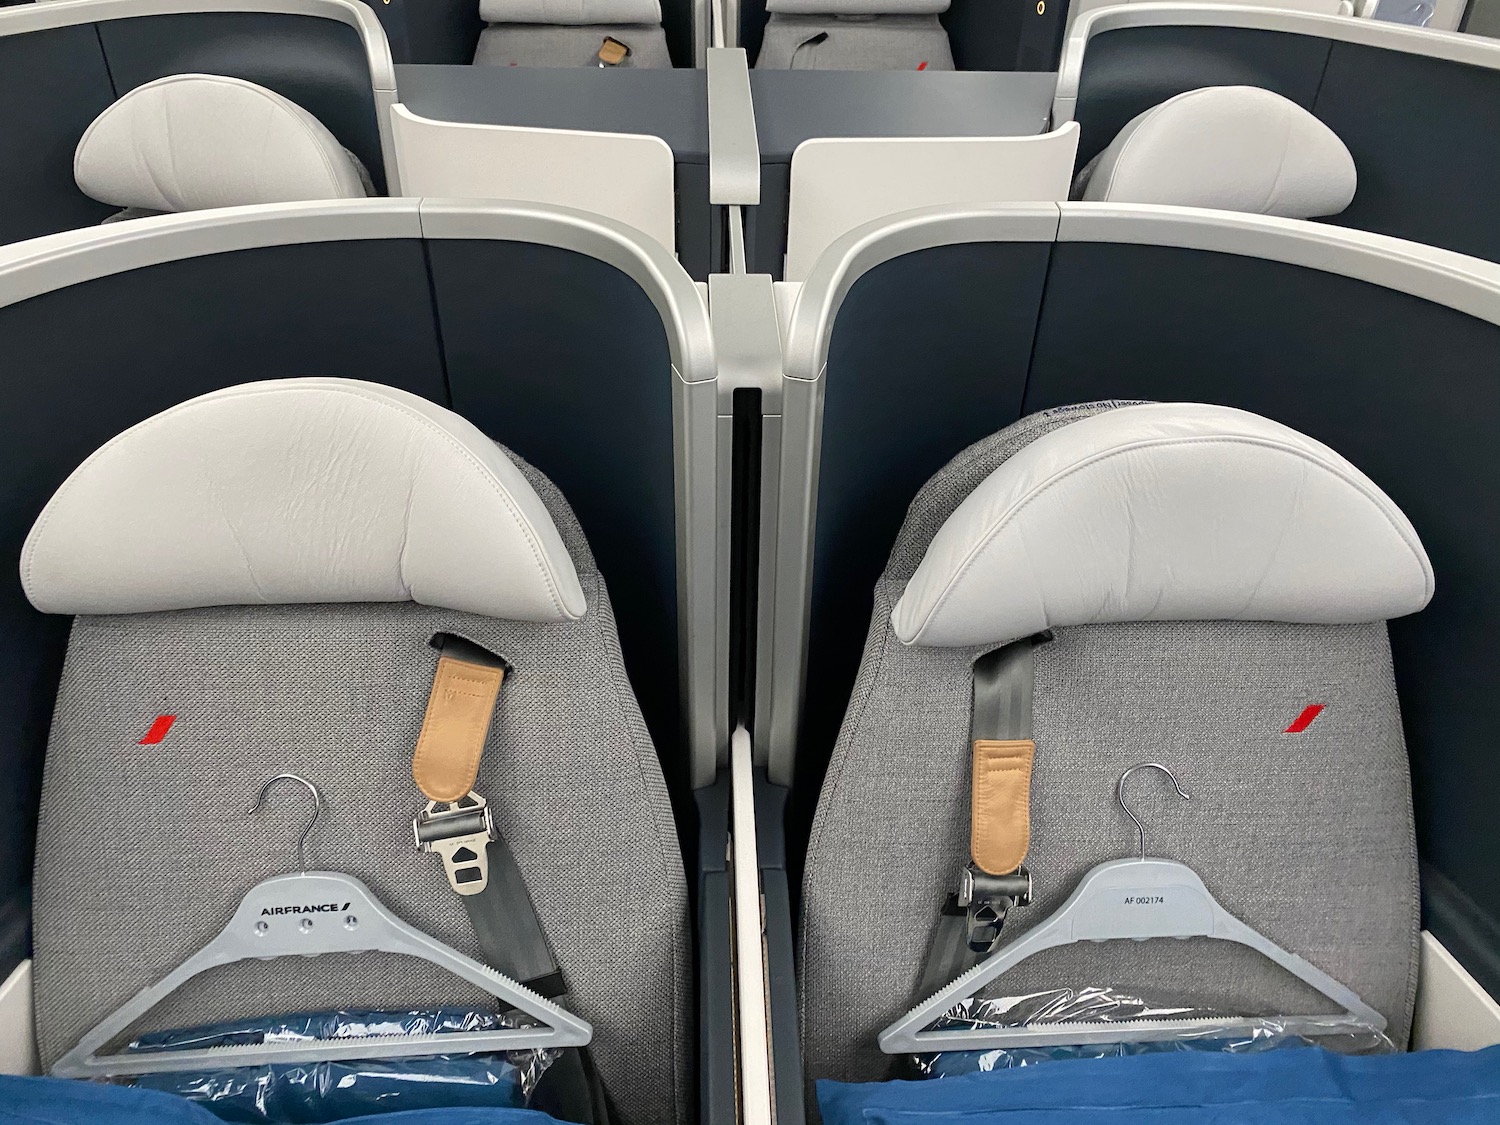 seats in an airplane with a swinger on the back